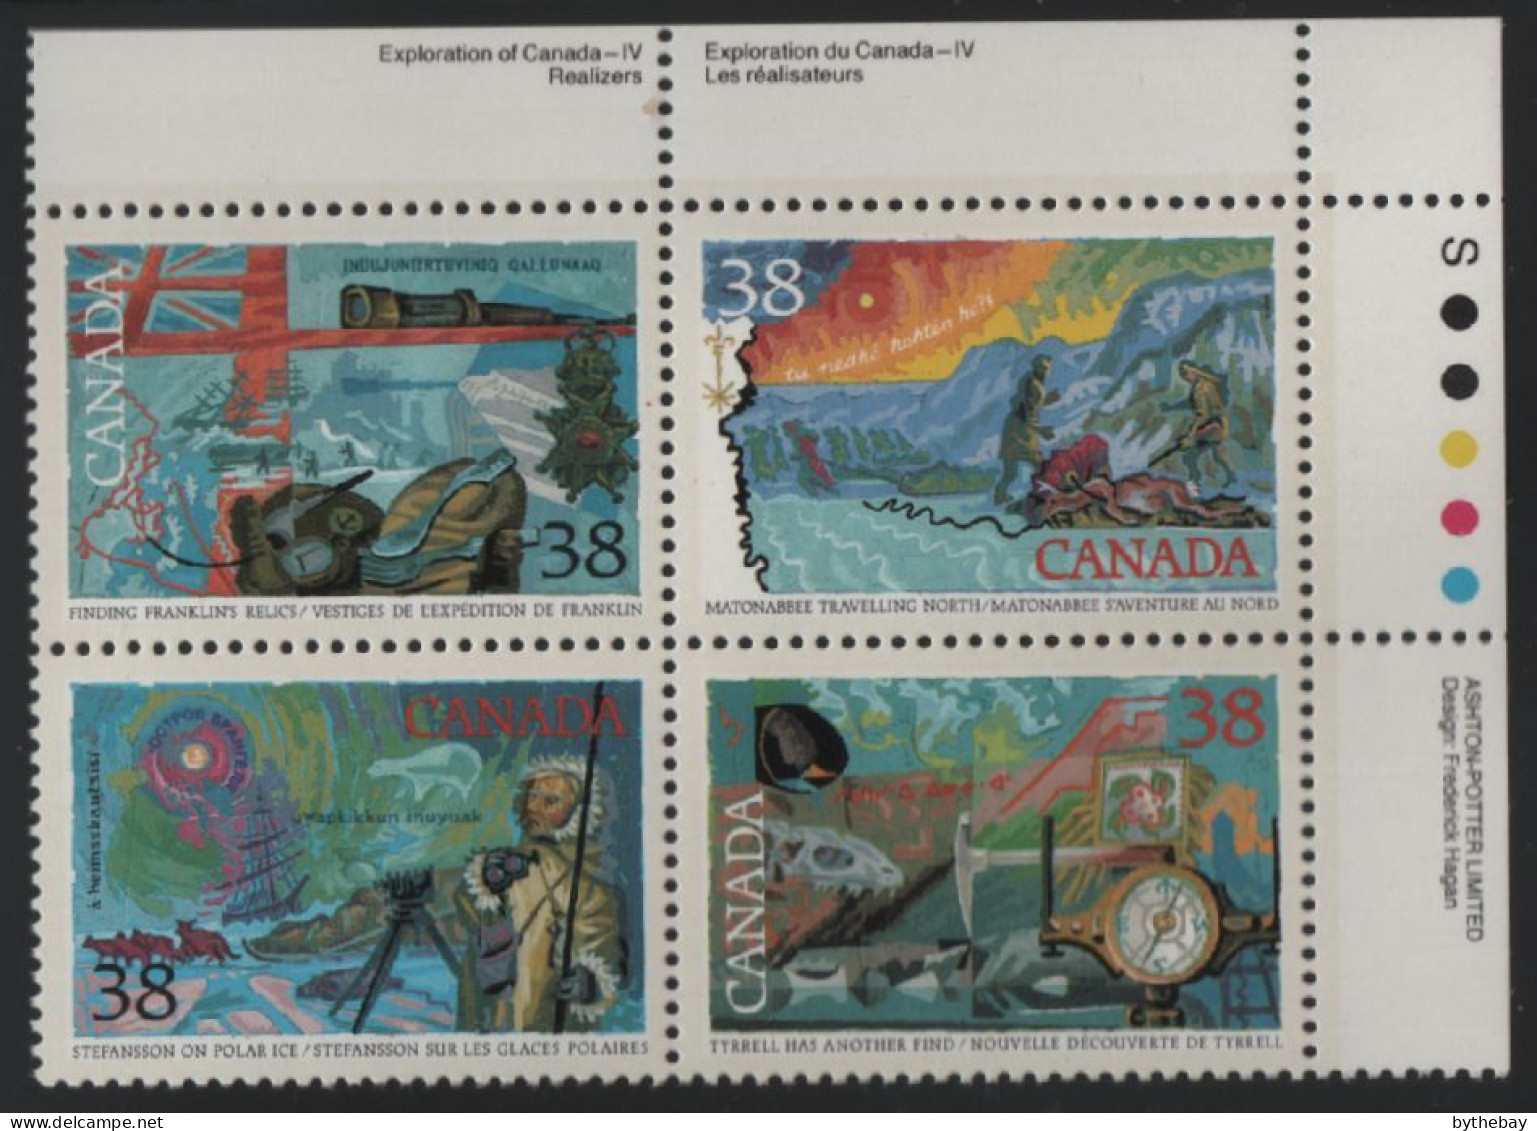 Canada 1989 MNH Sc 1236a 38c Explorers Of The North UR Plate Block - Num. Planches & Inscriptions Marge